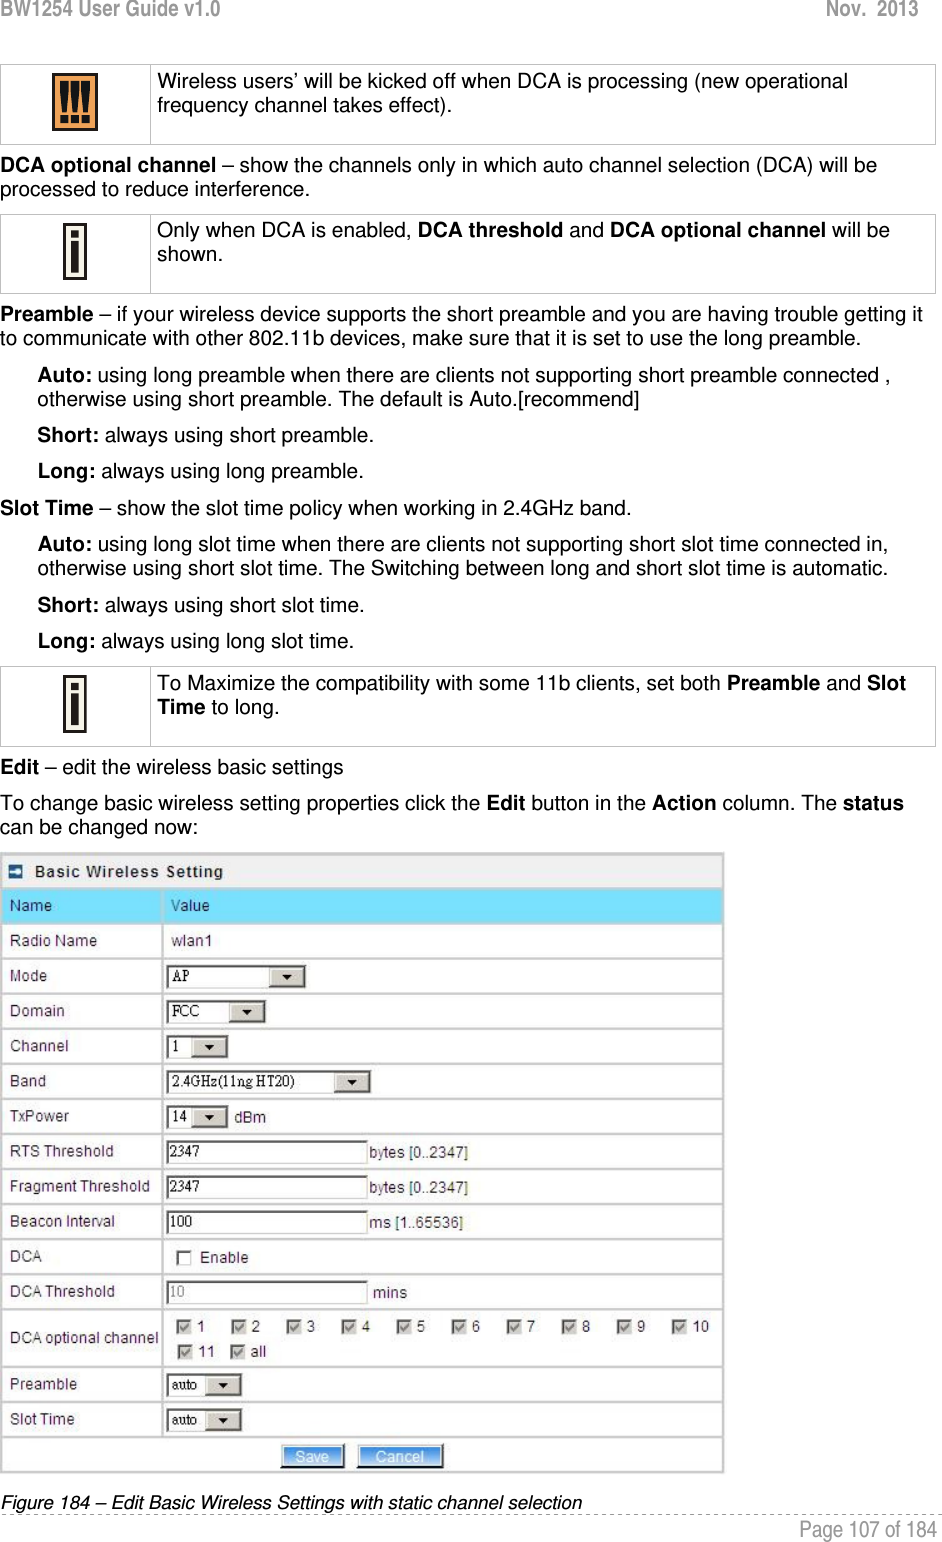 BW1254 User Guide v1.0  Nov.  2013     Page 107 of 184    Wireless users’ will be kicked off when DCA is processing (new operational frequency channel takes effect).  DCA optional channel – show the channels only in which auto channel selection (DCA) will be processed to reduce interference.  Only when DCA is enabled, DCA threshold and DCA optional channel will be shown.  Preamble – if your wireless device supports the short preamble and you are having trouble getting it to communicate with other 802.11b devices, make sure that it is set to use the long preamble. Auto: using long preamble when there are clients not supporting short preamble connected , otherwise using short preamble. The default is Auto.[recommend] Short: always using short preamble. Long: always using long preamble. Slot Time – show the slot time policy when working in 2.4GHz band. Auto: using long slot time when there are clients not supporting short slot time connected in, otherwise using short slot time. The Switching between long and short slot time is automatic. Short: always using short slot time. Long: always using long slot time.  To Maximize the compatibility with some 11b clients, set both Preamble and Slot Time to long. Edit – edit the wireless basic settings To change basic wireless setting properties click the Edit button in the Action column. The status can be changed now:  Figure 184 – Edit Basic Wireless Settings with static channel selection 